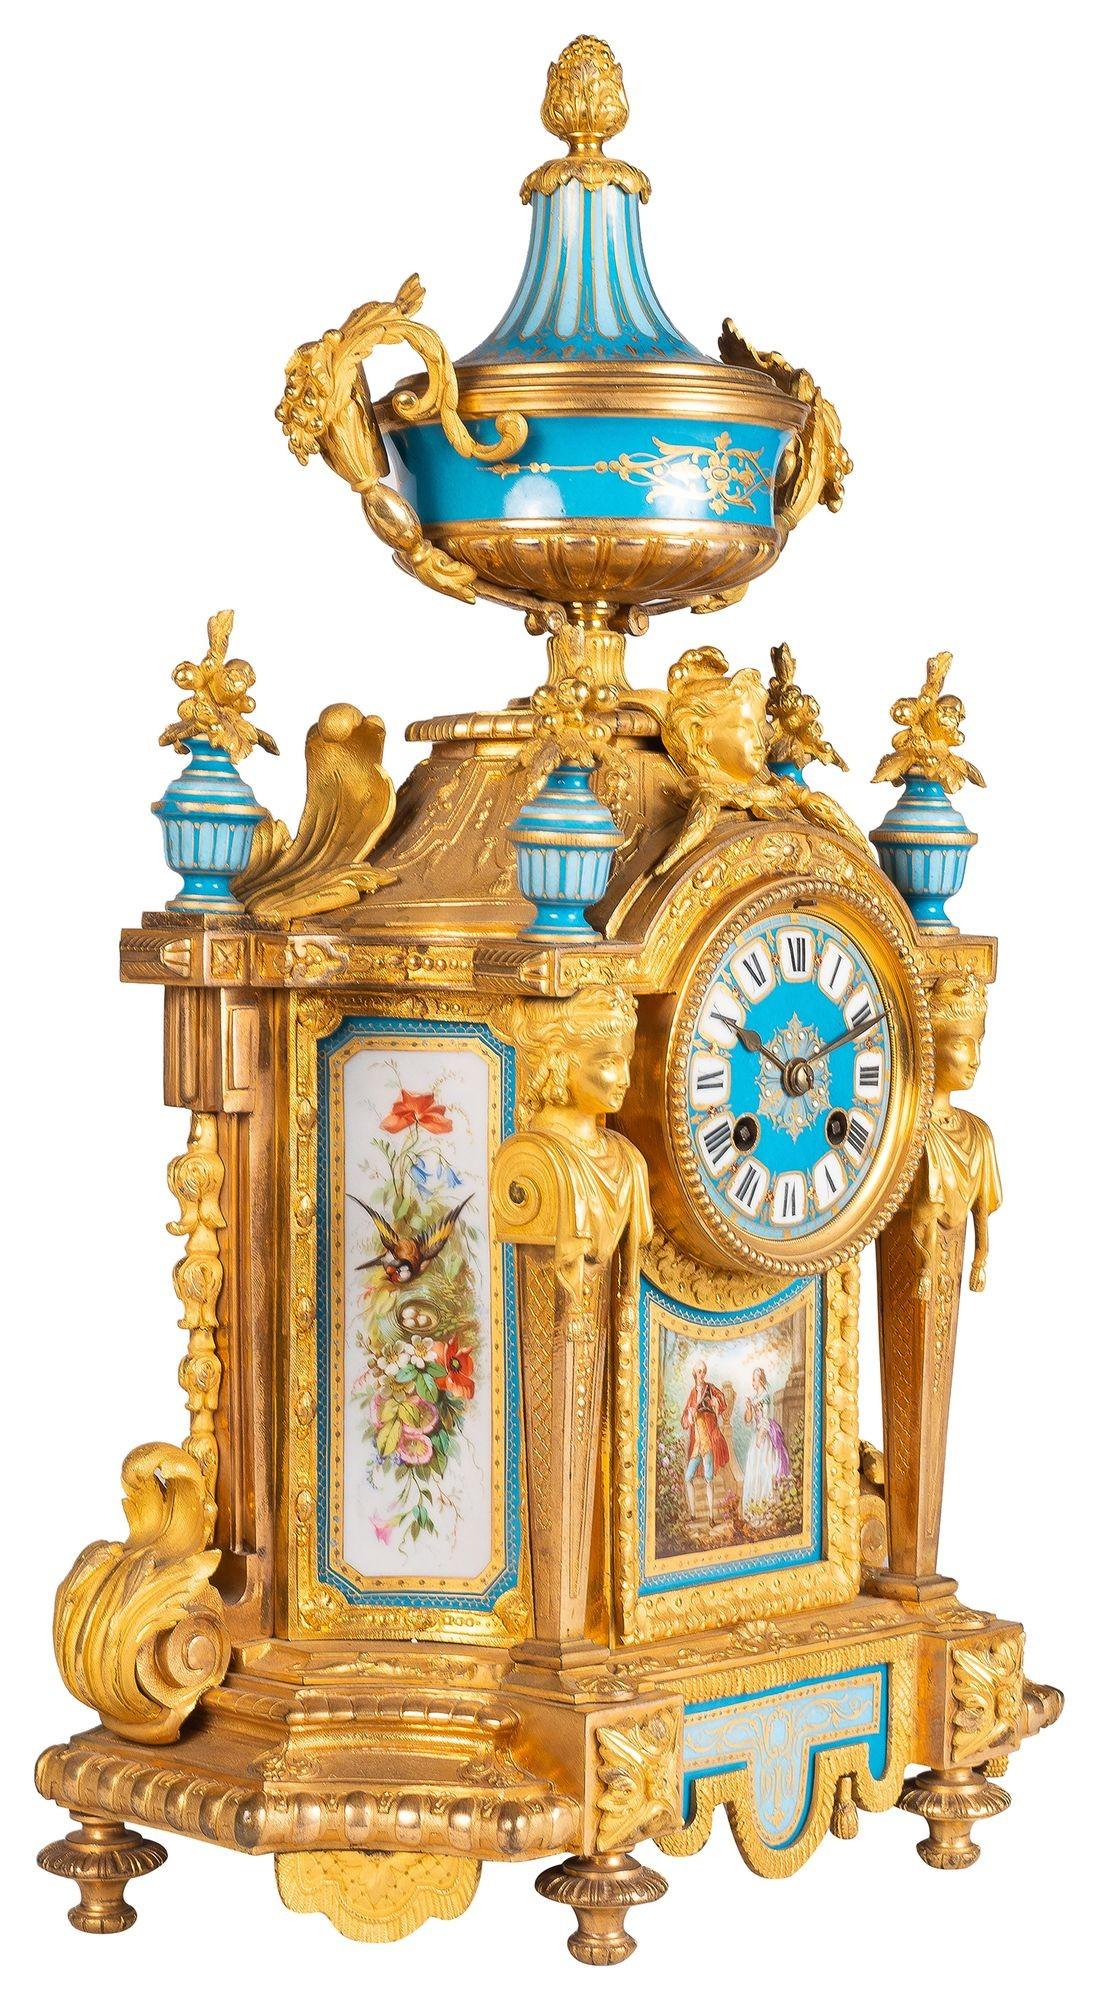 A very impressive 19th Century French Serves style porcelain and gilded ormolu clock garniture. Having Turquoise ground with inset hand painted romantic scenes to the porcelain, ormolu monopodia supports either side of the clock face, an eight day